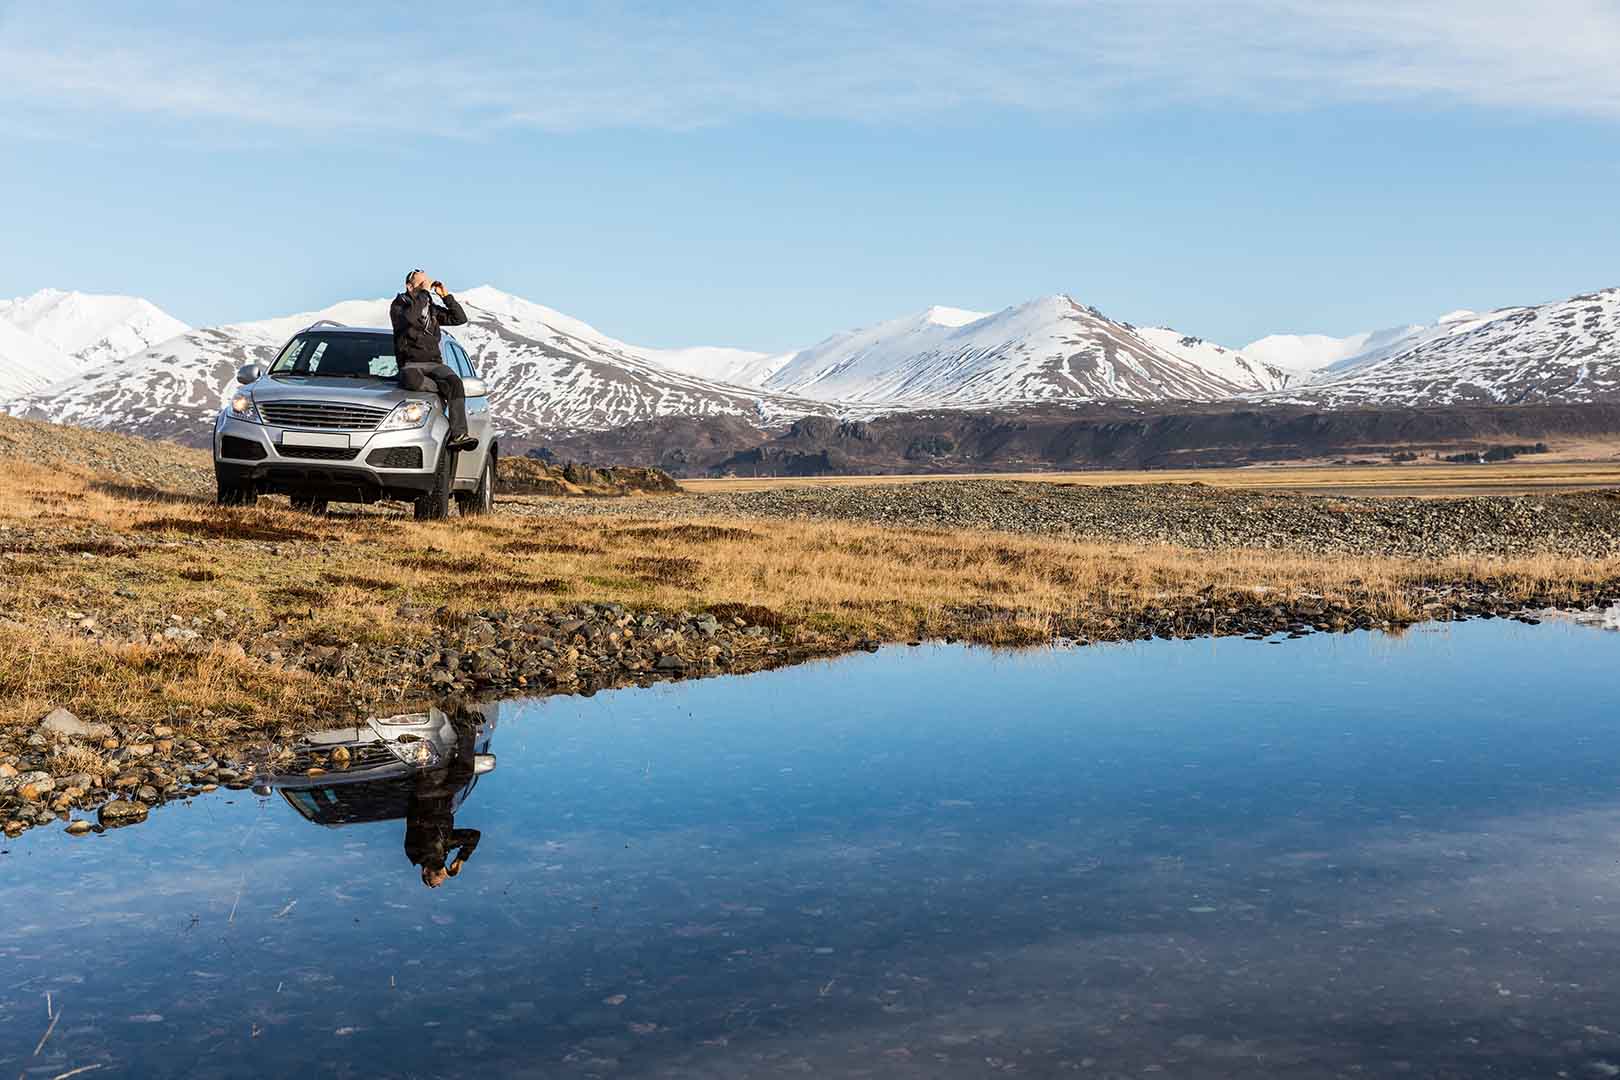 Man explorer in Iceland sitting on the car